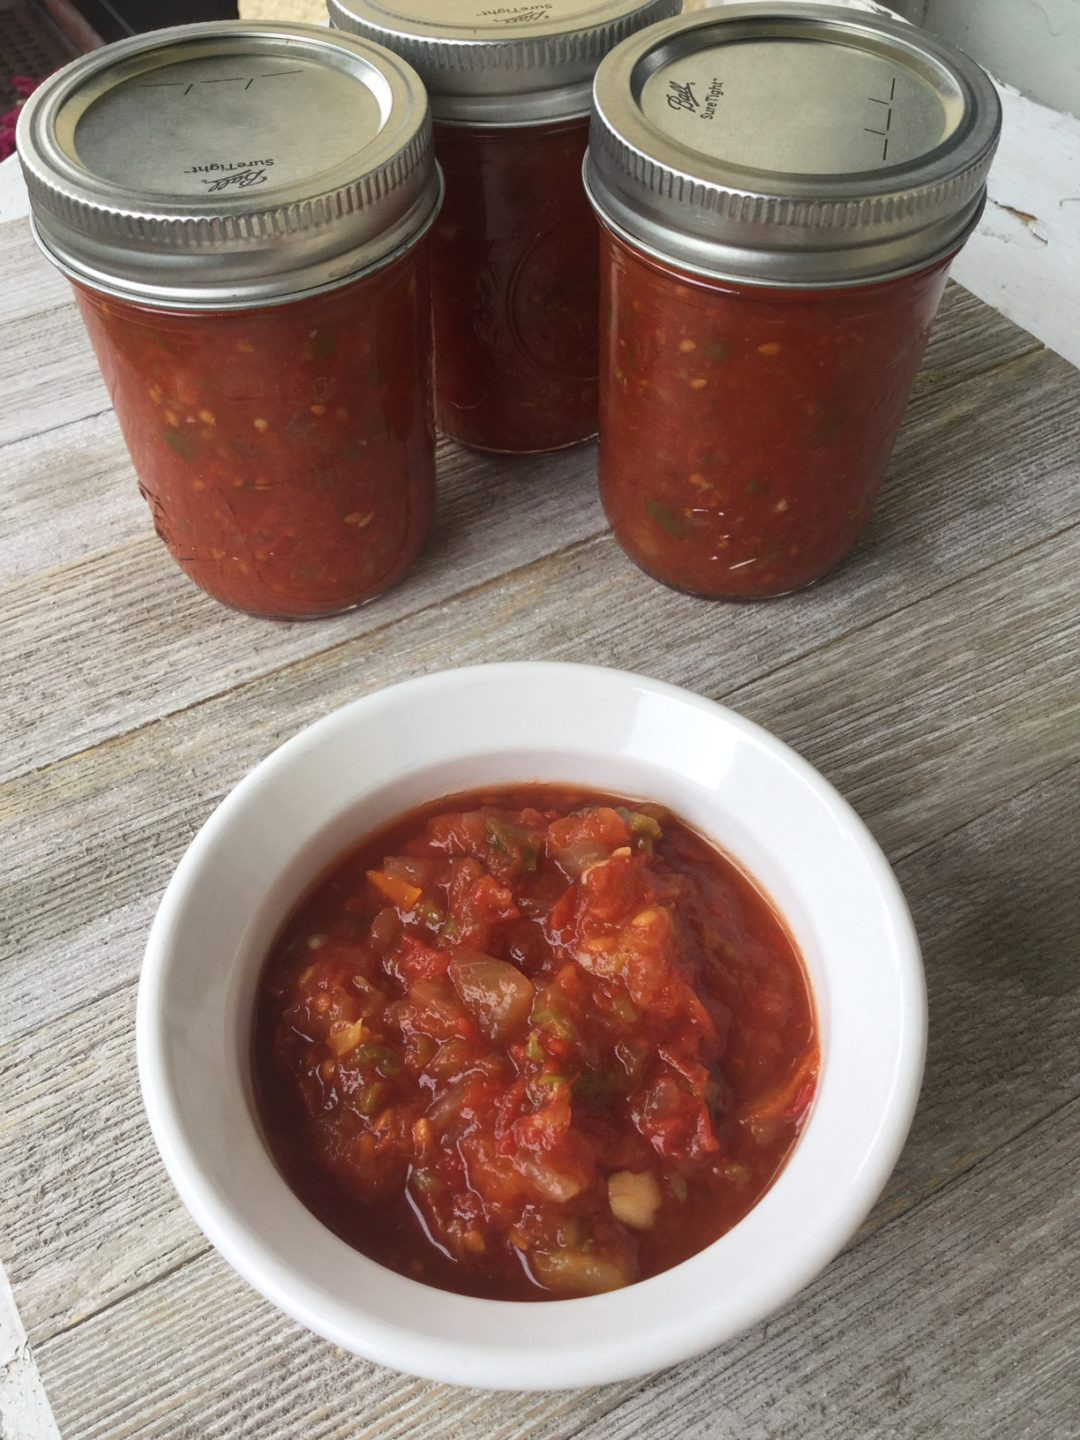 Homemade Salsa Recipe For Canning
 The Best Homemade Salsa for Canning My Healthy